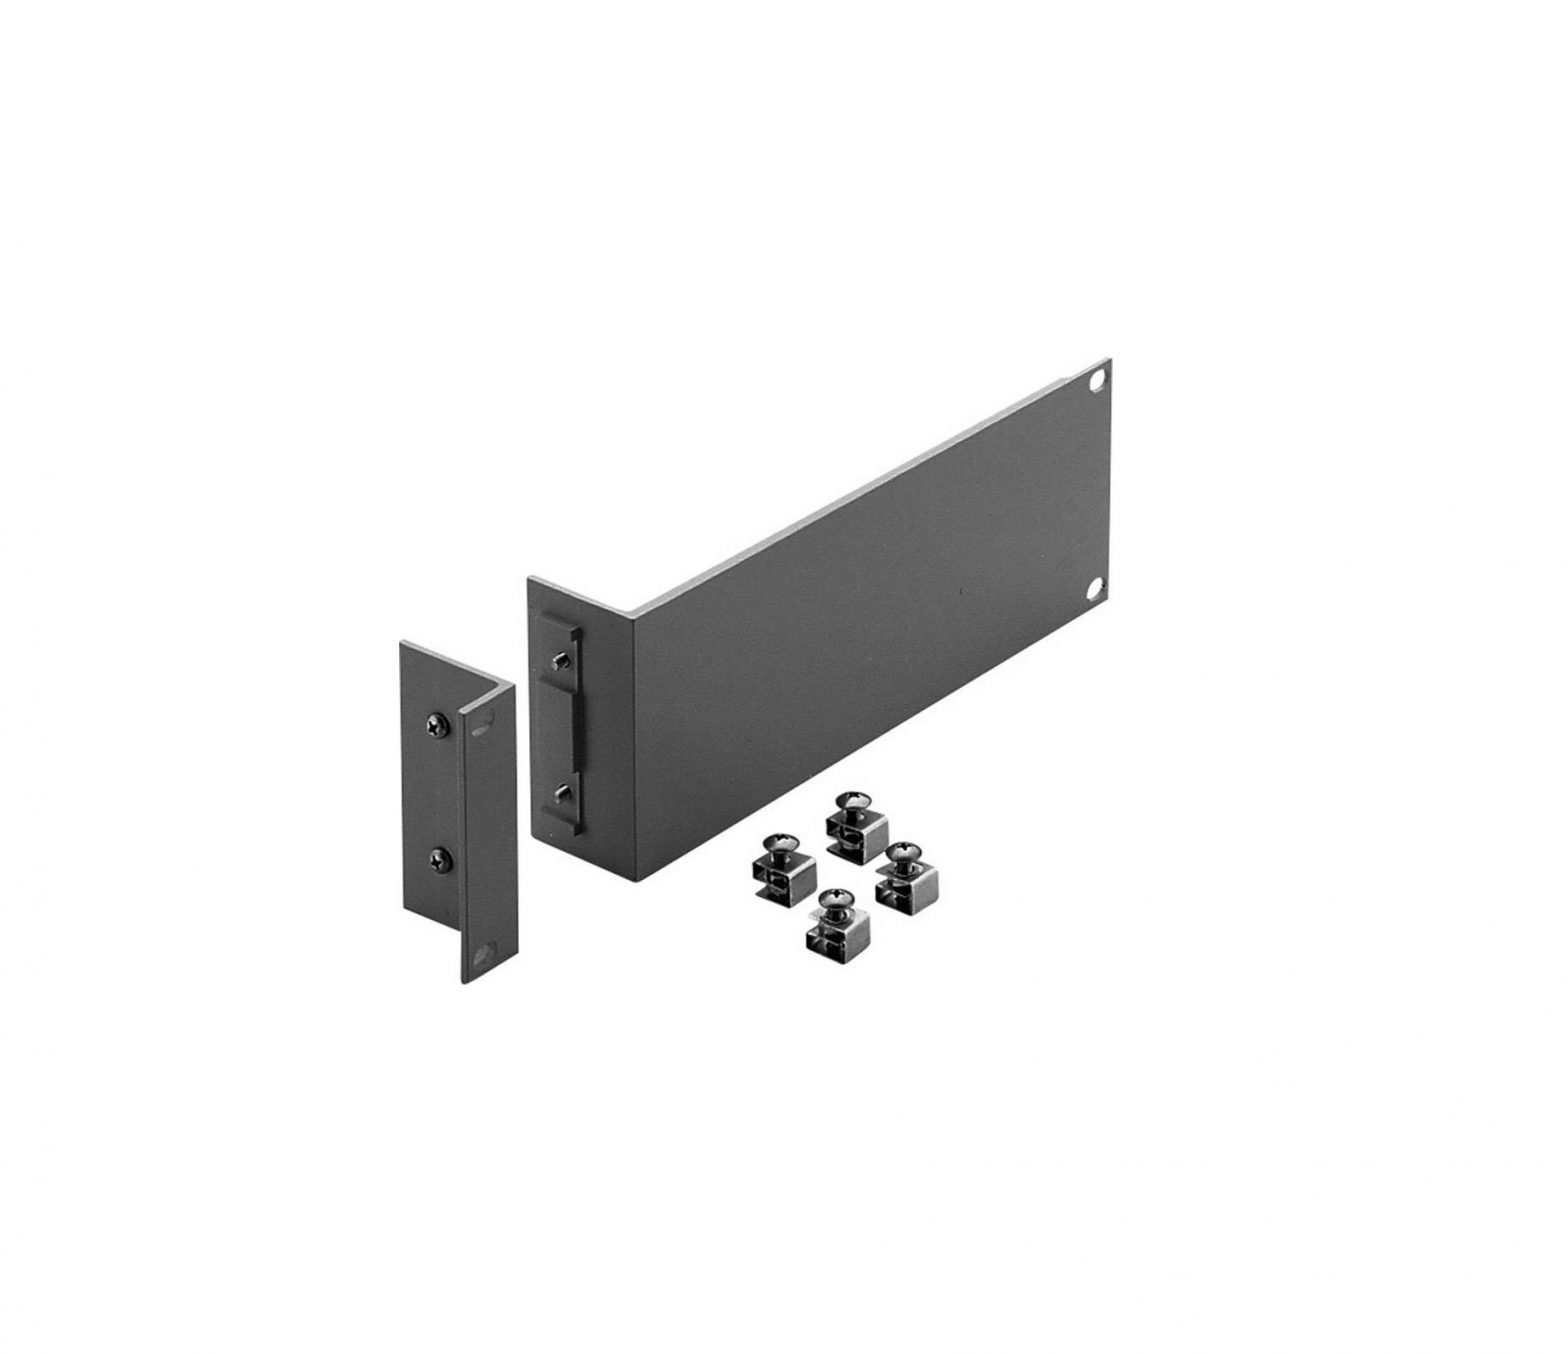 KEITHLEY 4288-1 Single-Unit Rack-Mount Kit Installation Guide